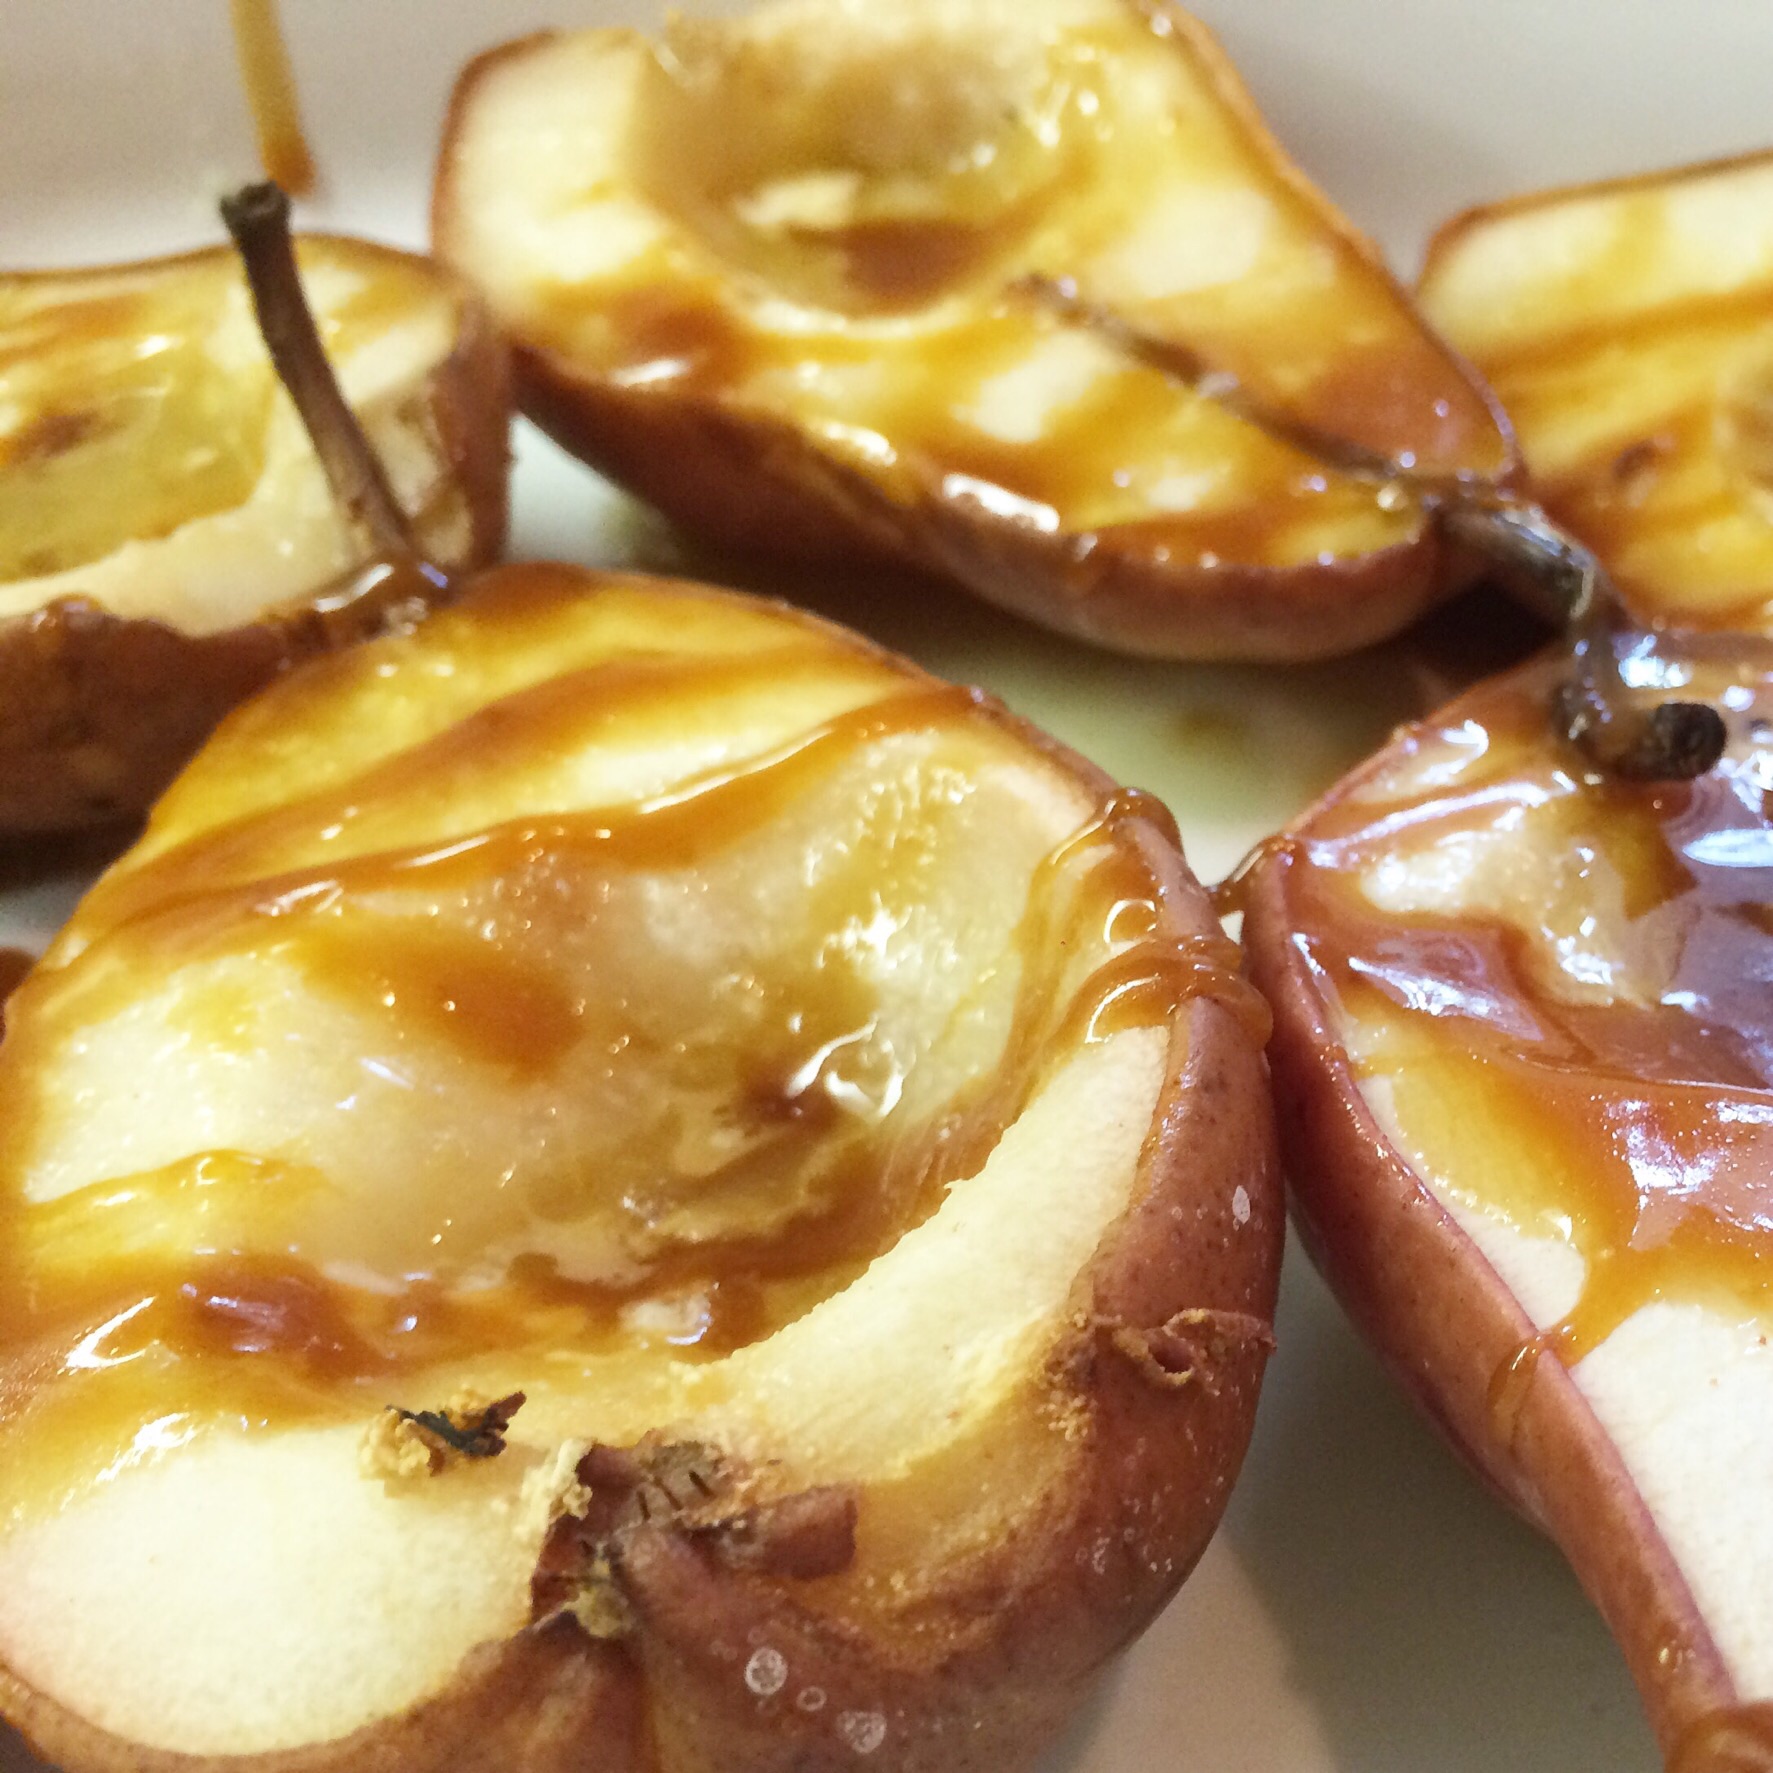 Drizzle Paleo Caramel on Baked Pears and finish off in broiler. You can always add more after. Enjoy!